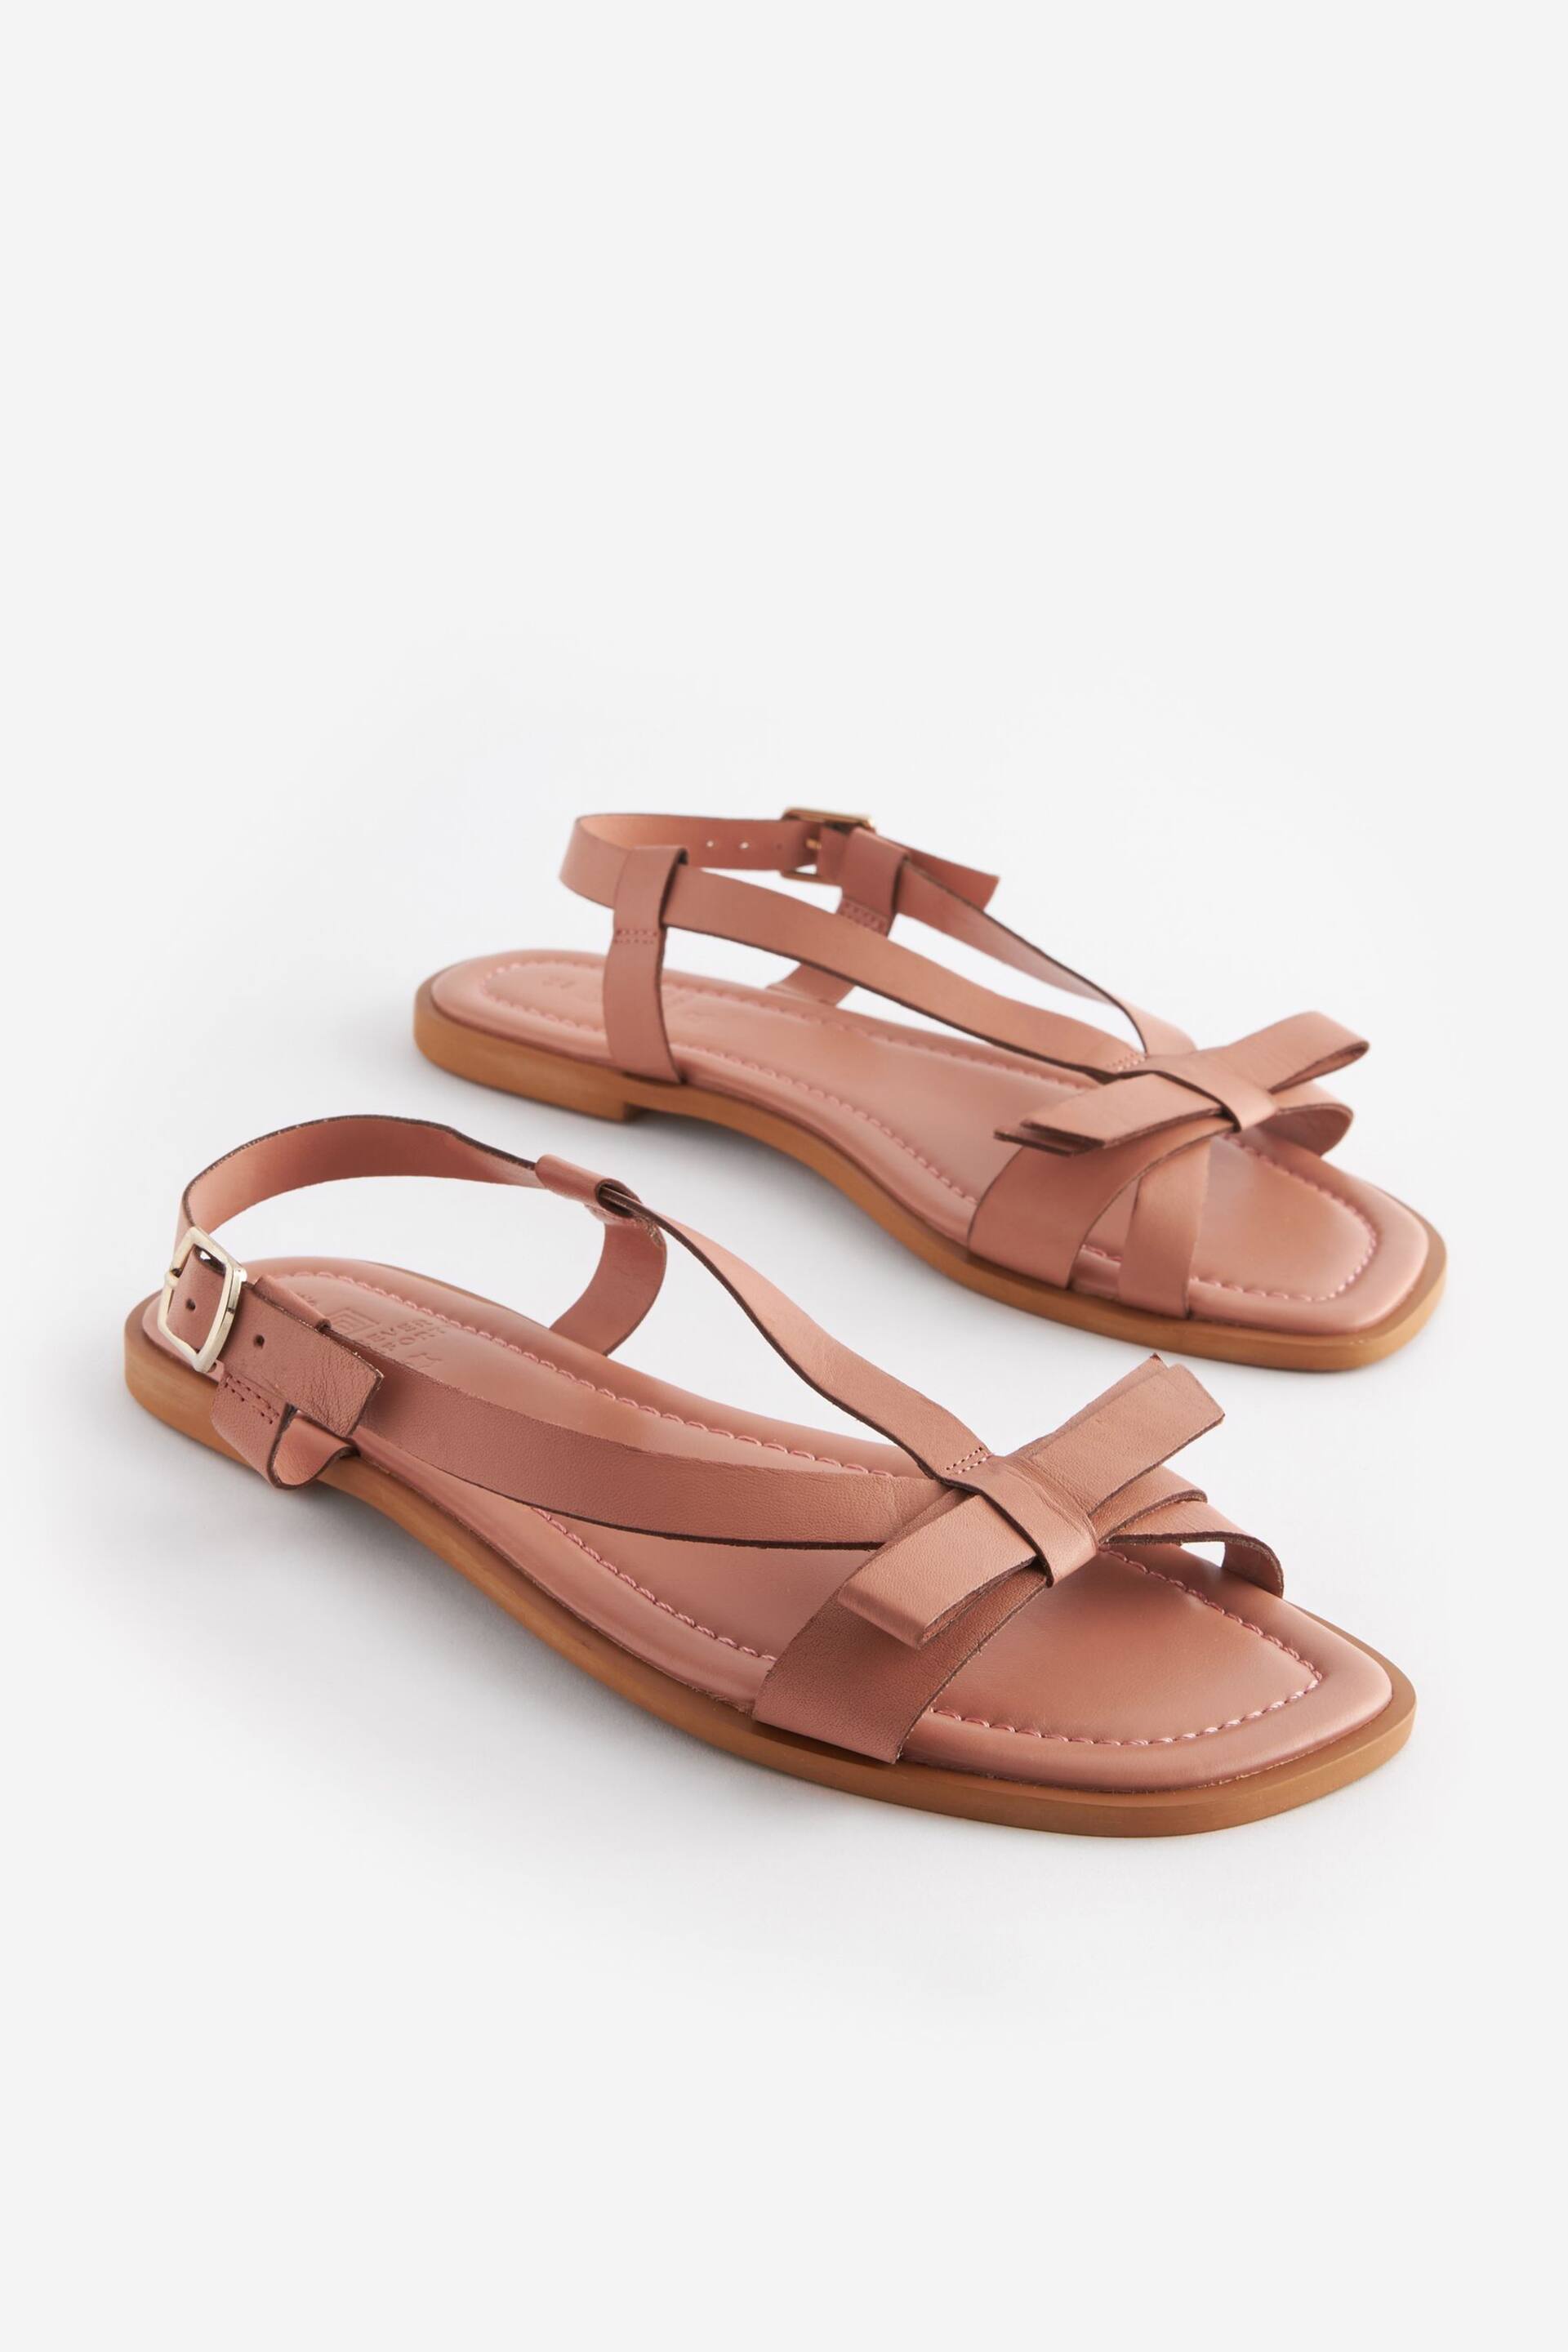 Nude Regular/Wide Fit Forever Comfort ® Leather Bow Sandals - Image 4 of 7